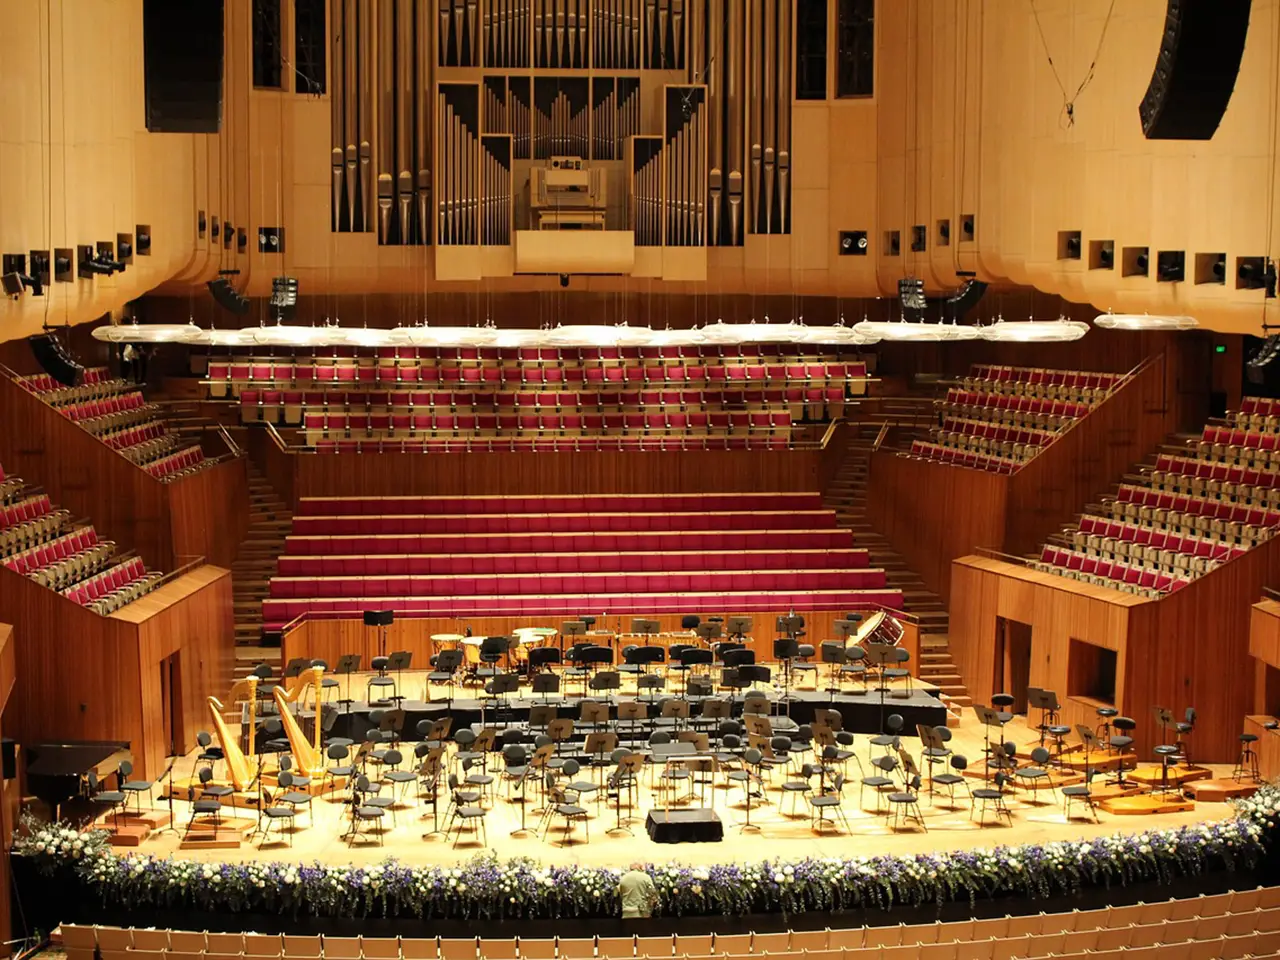 Sydney Opera House. Today, you can attend a concert, eat in one of the establishments, or take a tour to explore the Sydney Opera House's top attractions.